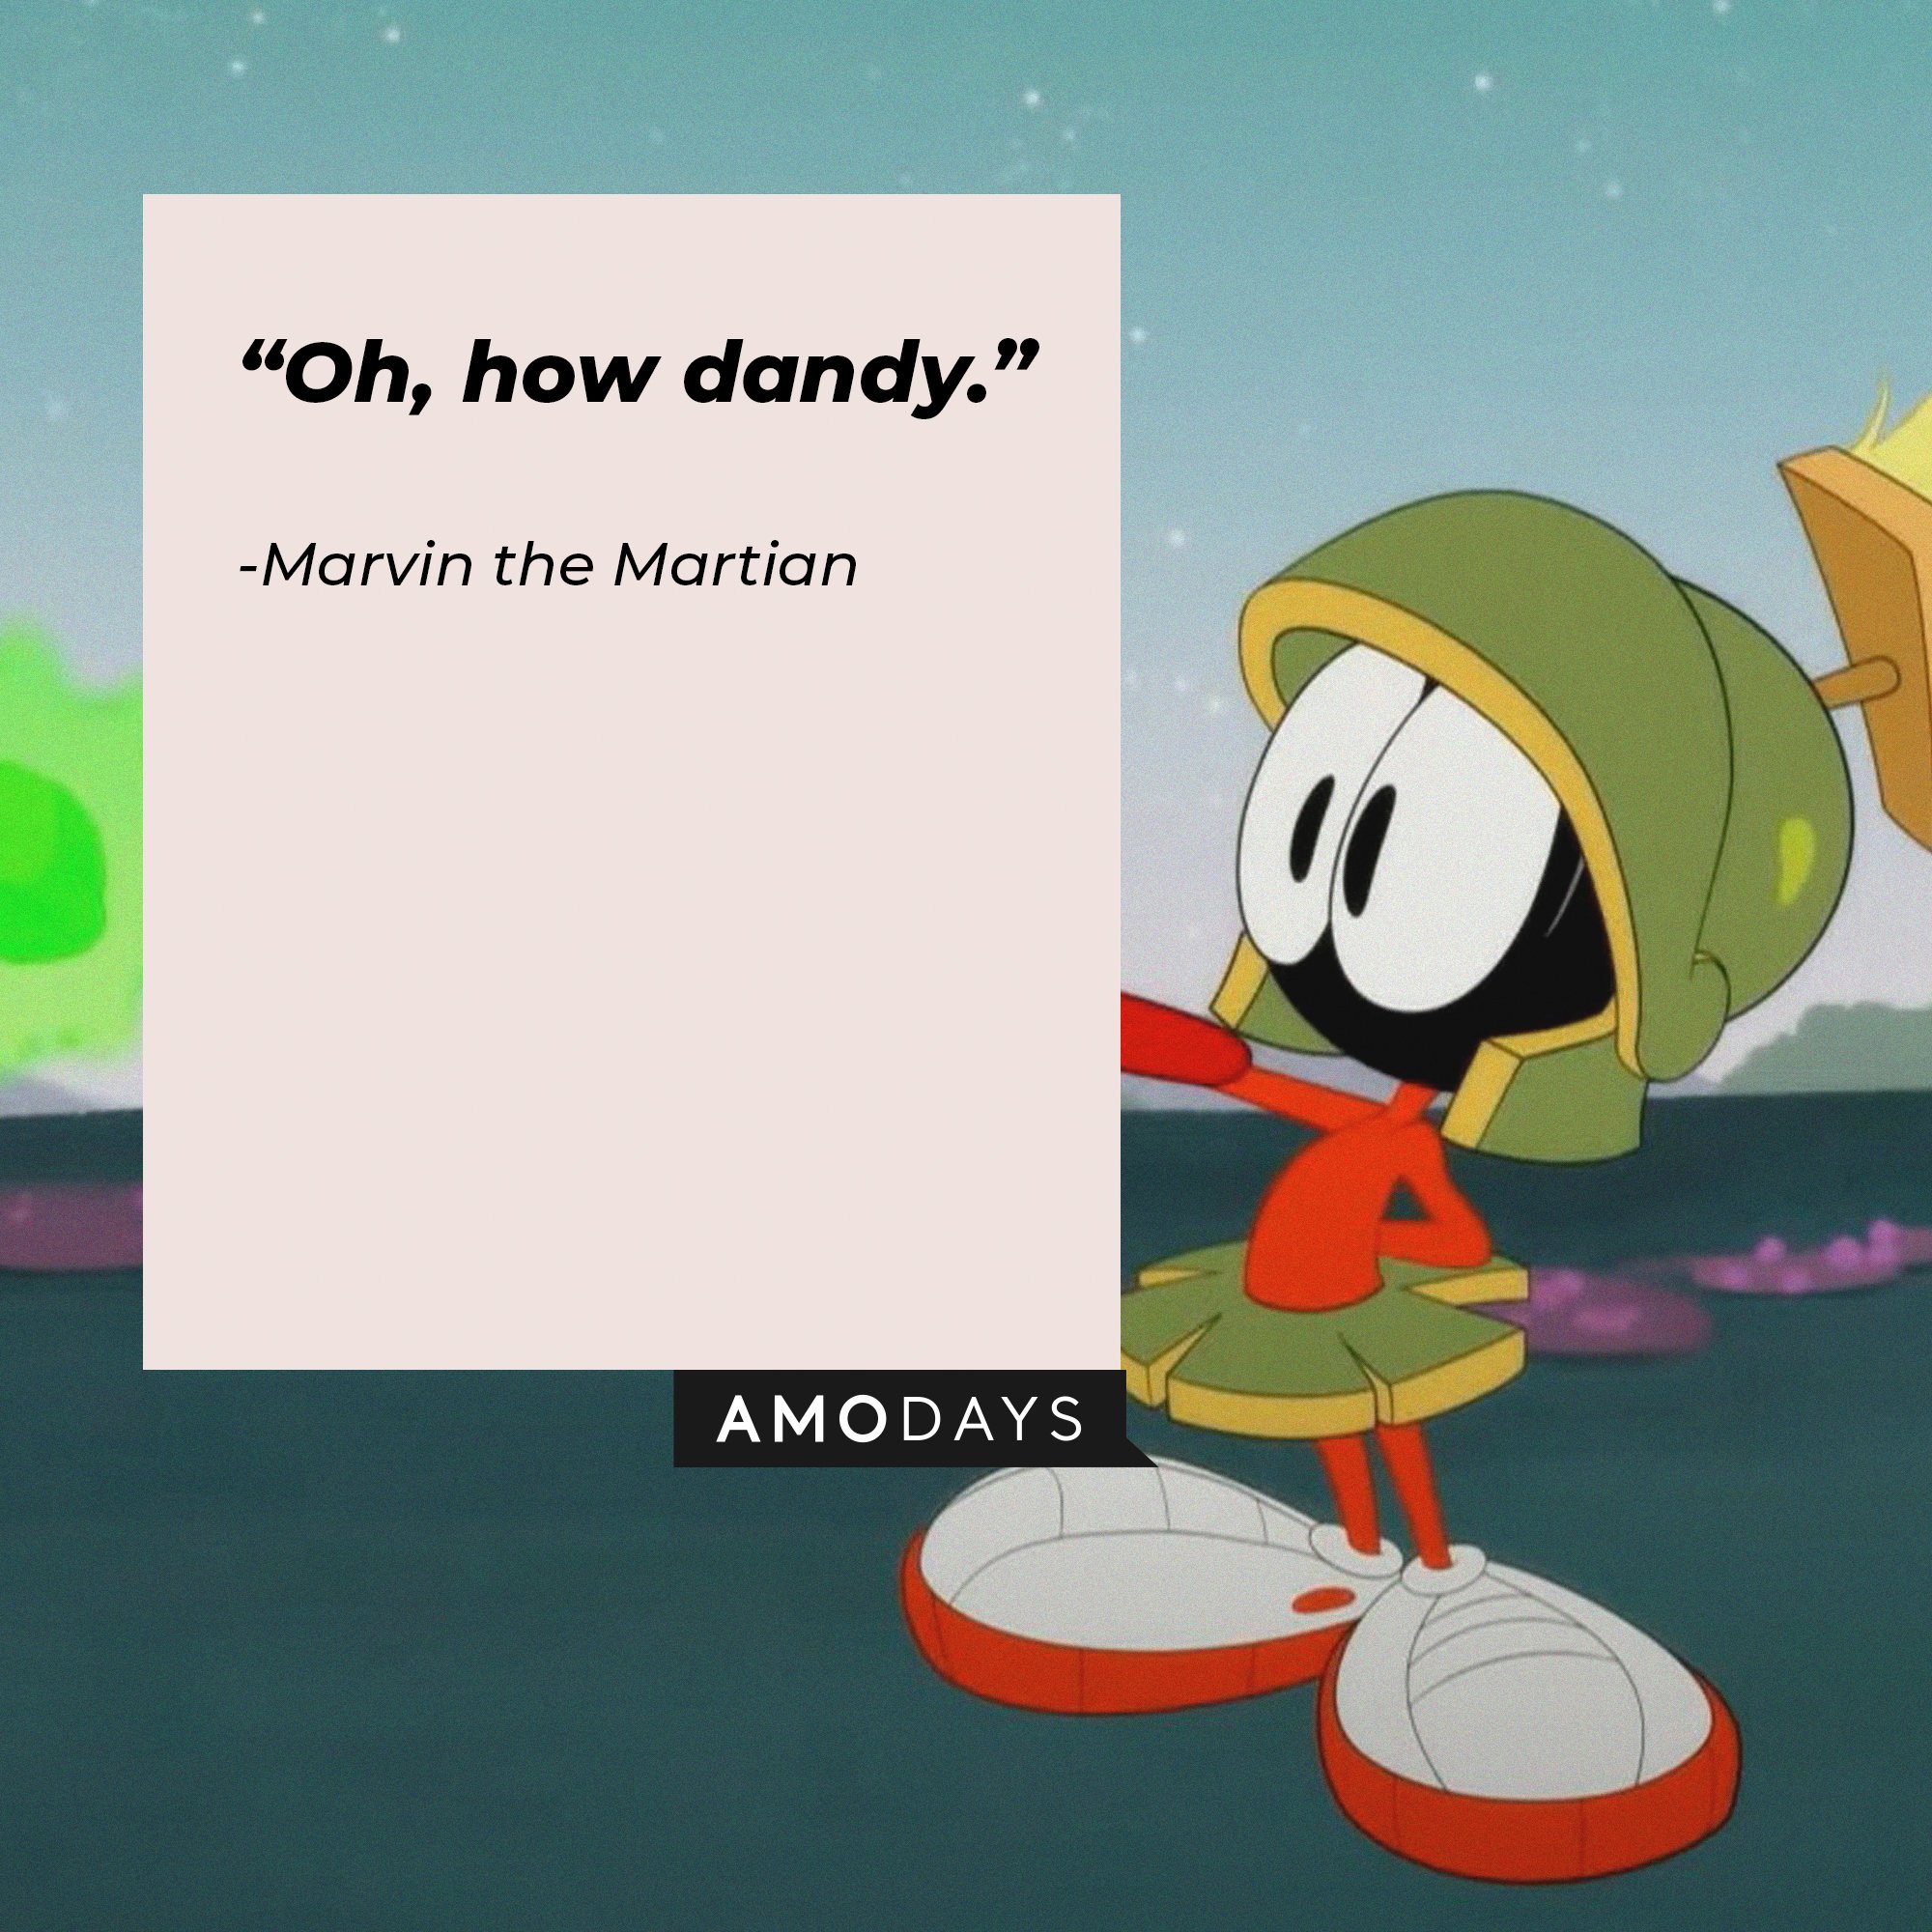 Marvin the Martian’s quote: "Oh, how dandy.” | Image: AmoDays